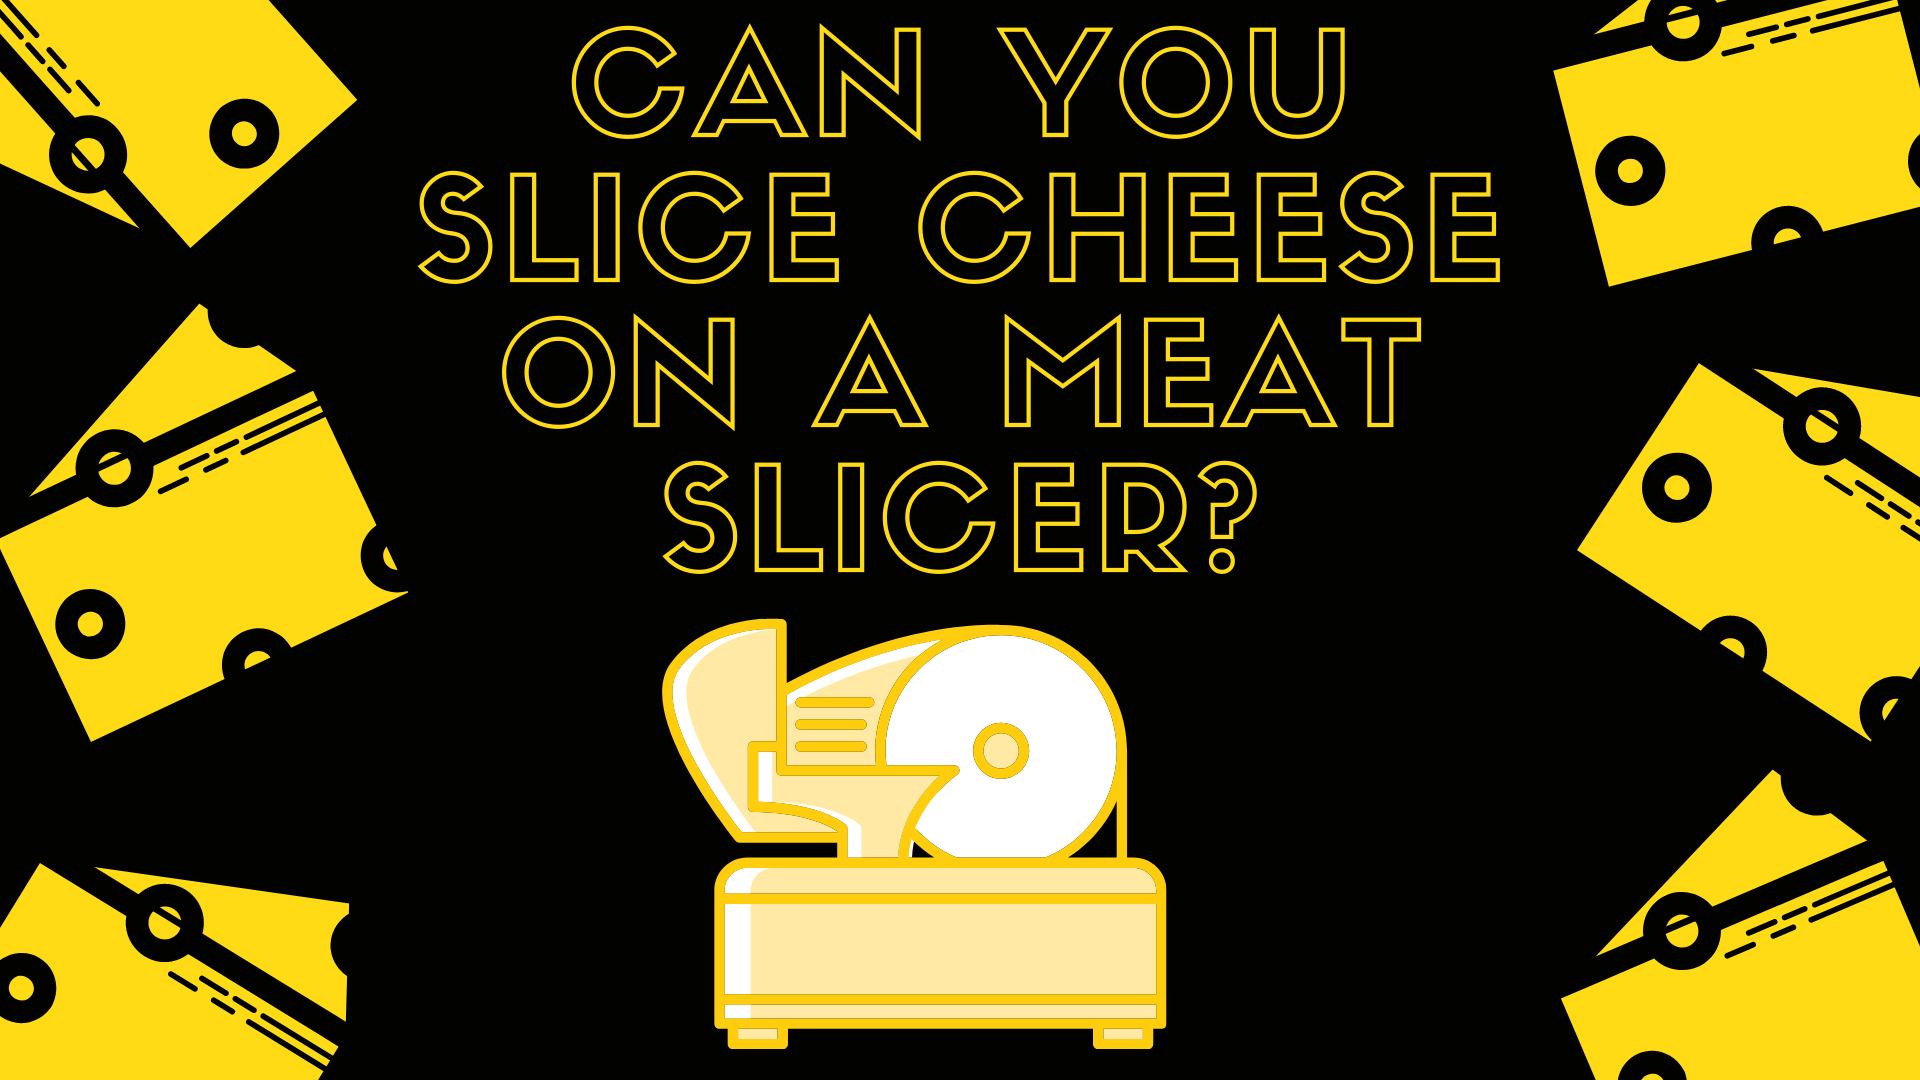 Slice Cheese on a Meat Slicer